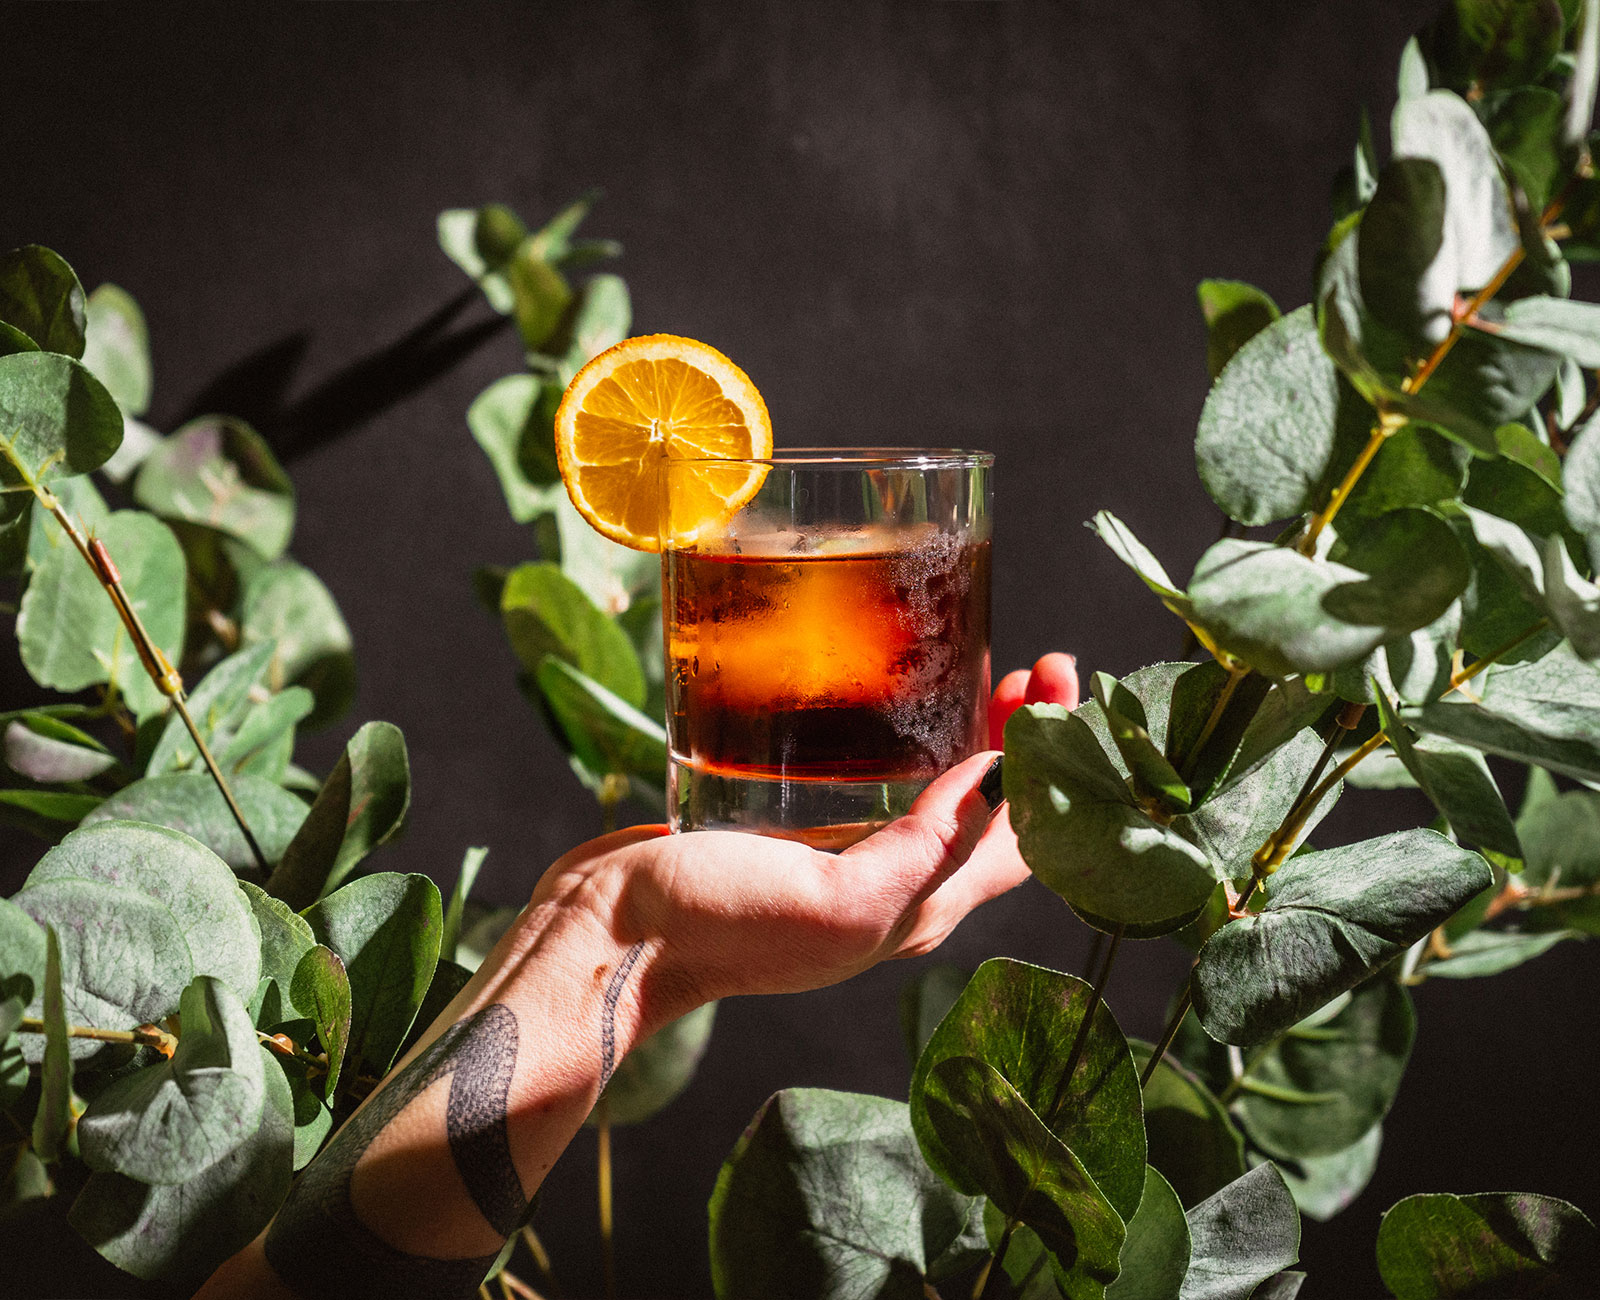 El Vermut aperitif with an orange slice garnish, held by a hand in the middle of greenery